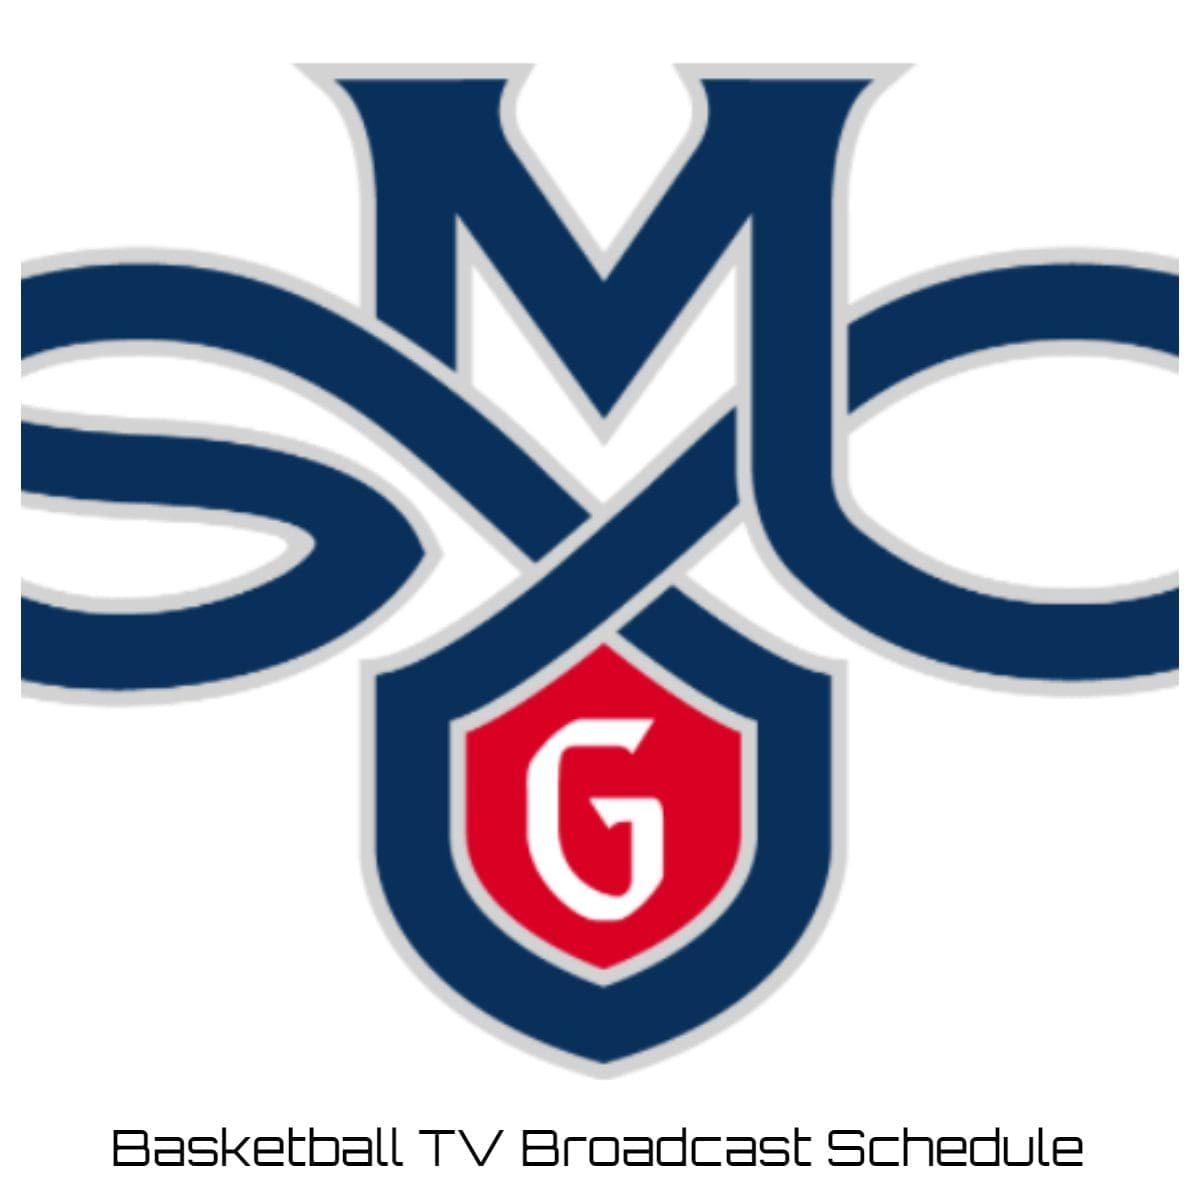 St. Mary's Gaels Basketball TV Broadcast Schedule